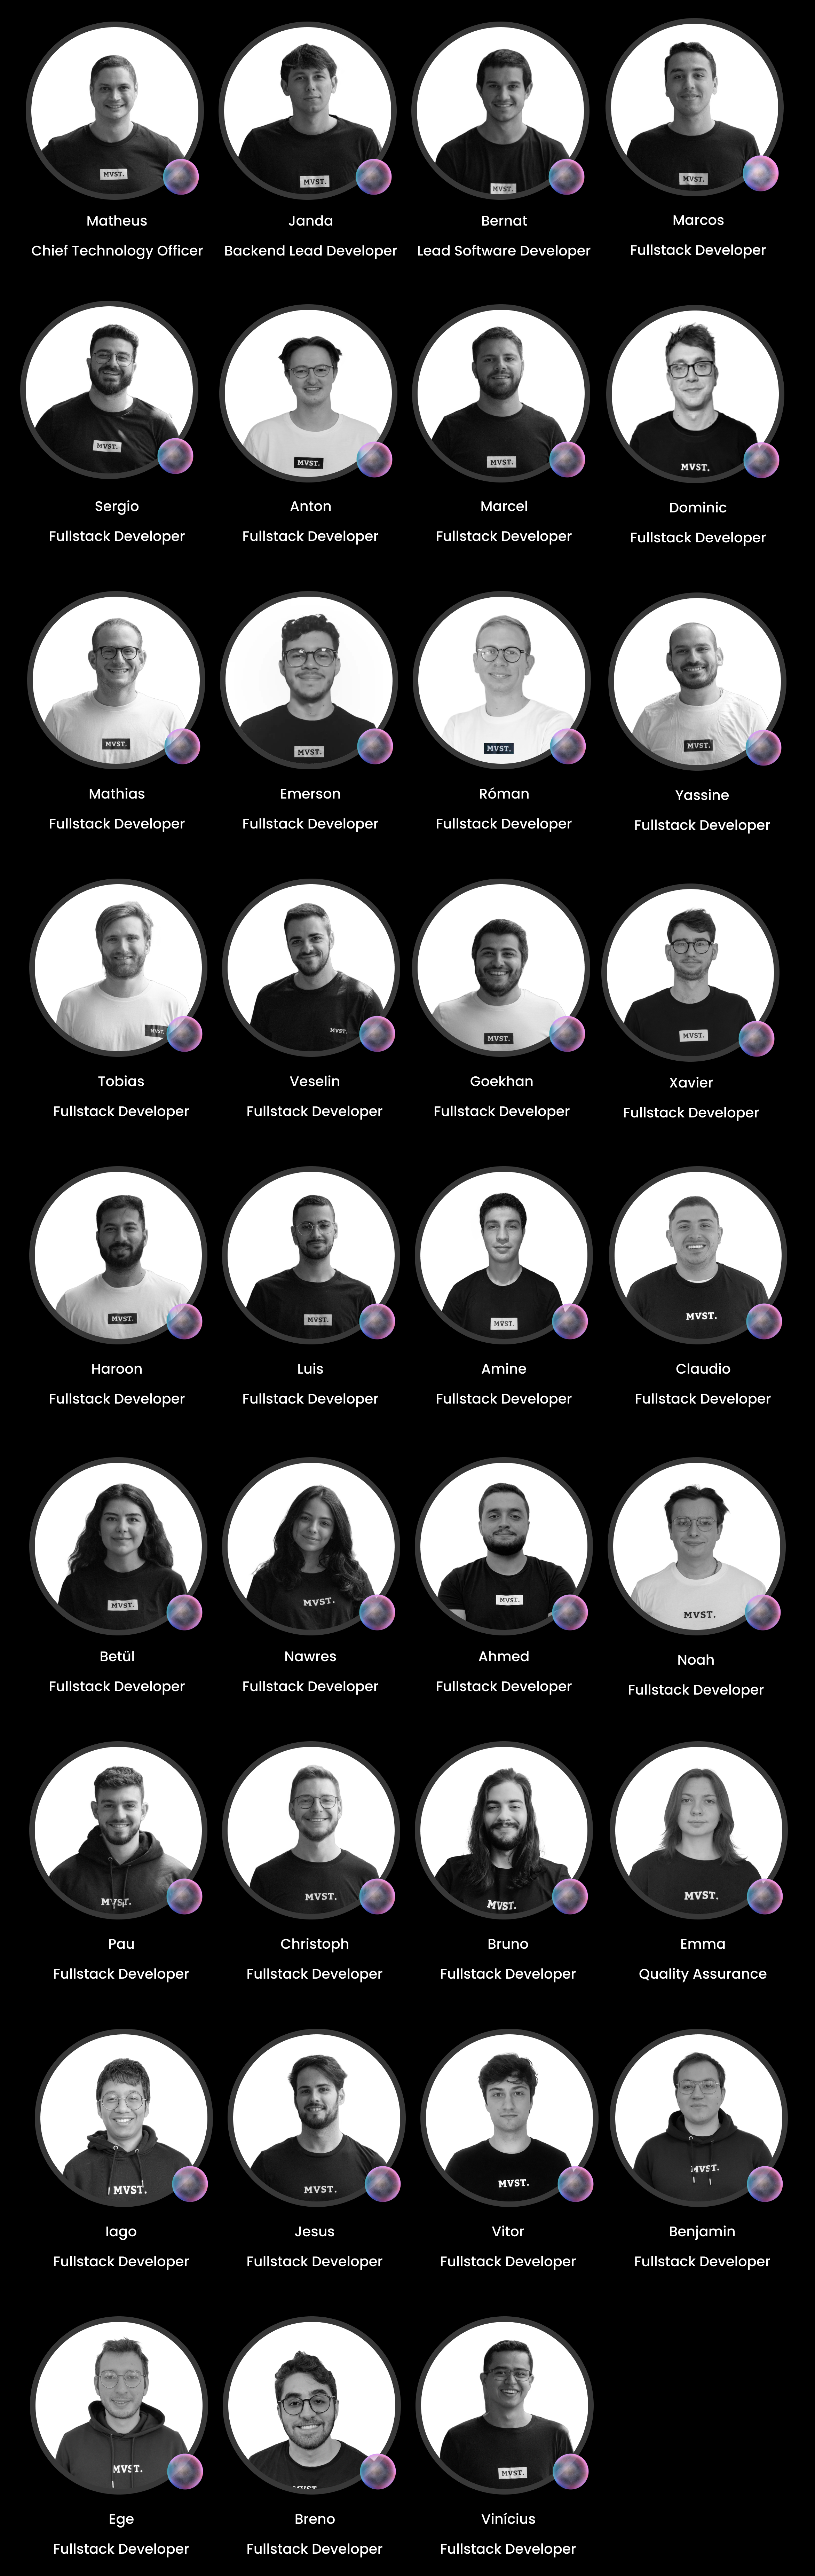 Photos, Names, and Roles of the Developers Team at MVST